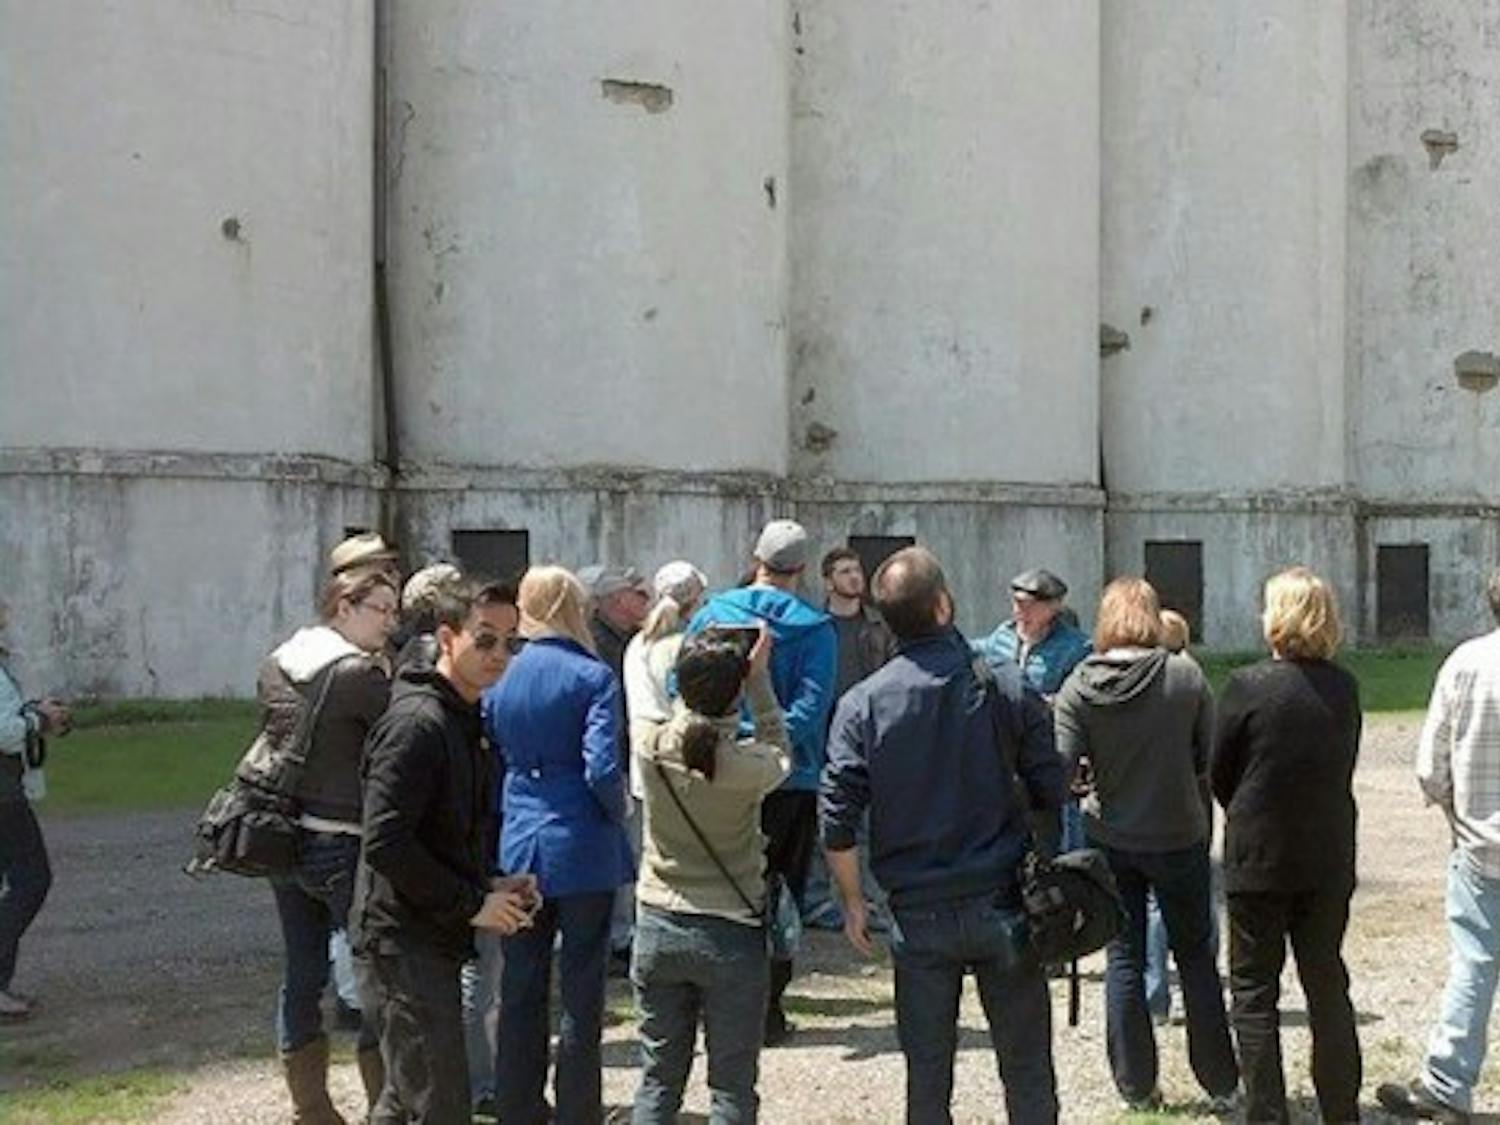 A tour group for Explore Buffalo stands looking up at one of the grain elevators that dots Buffalo&rsquo;s skyline. By touring both the hidden and obvious parts of Buffalo, Explore Buffalo tours give a unique perspective on the city&rsquo;s past and present.&nbsp;Courtesy of Explore Buffalo